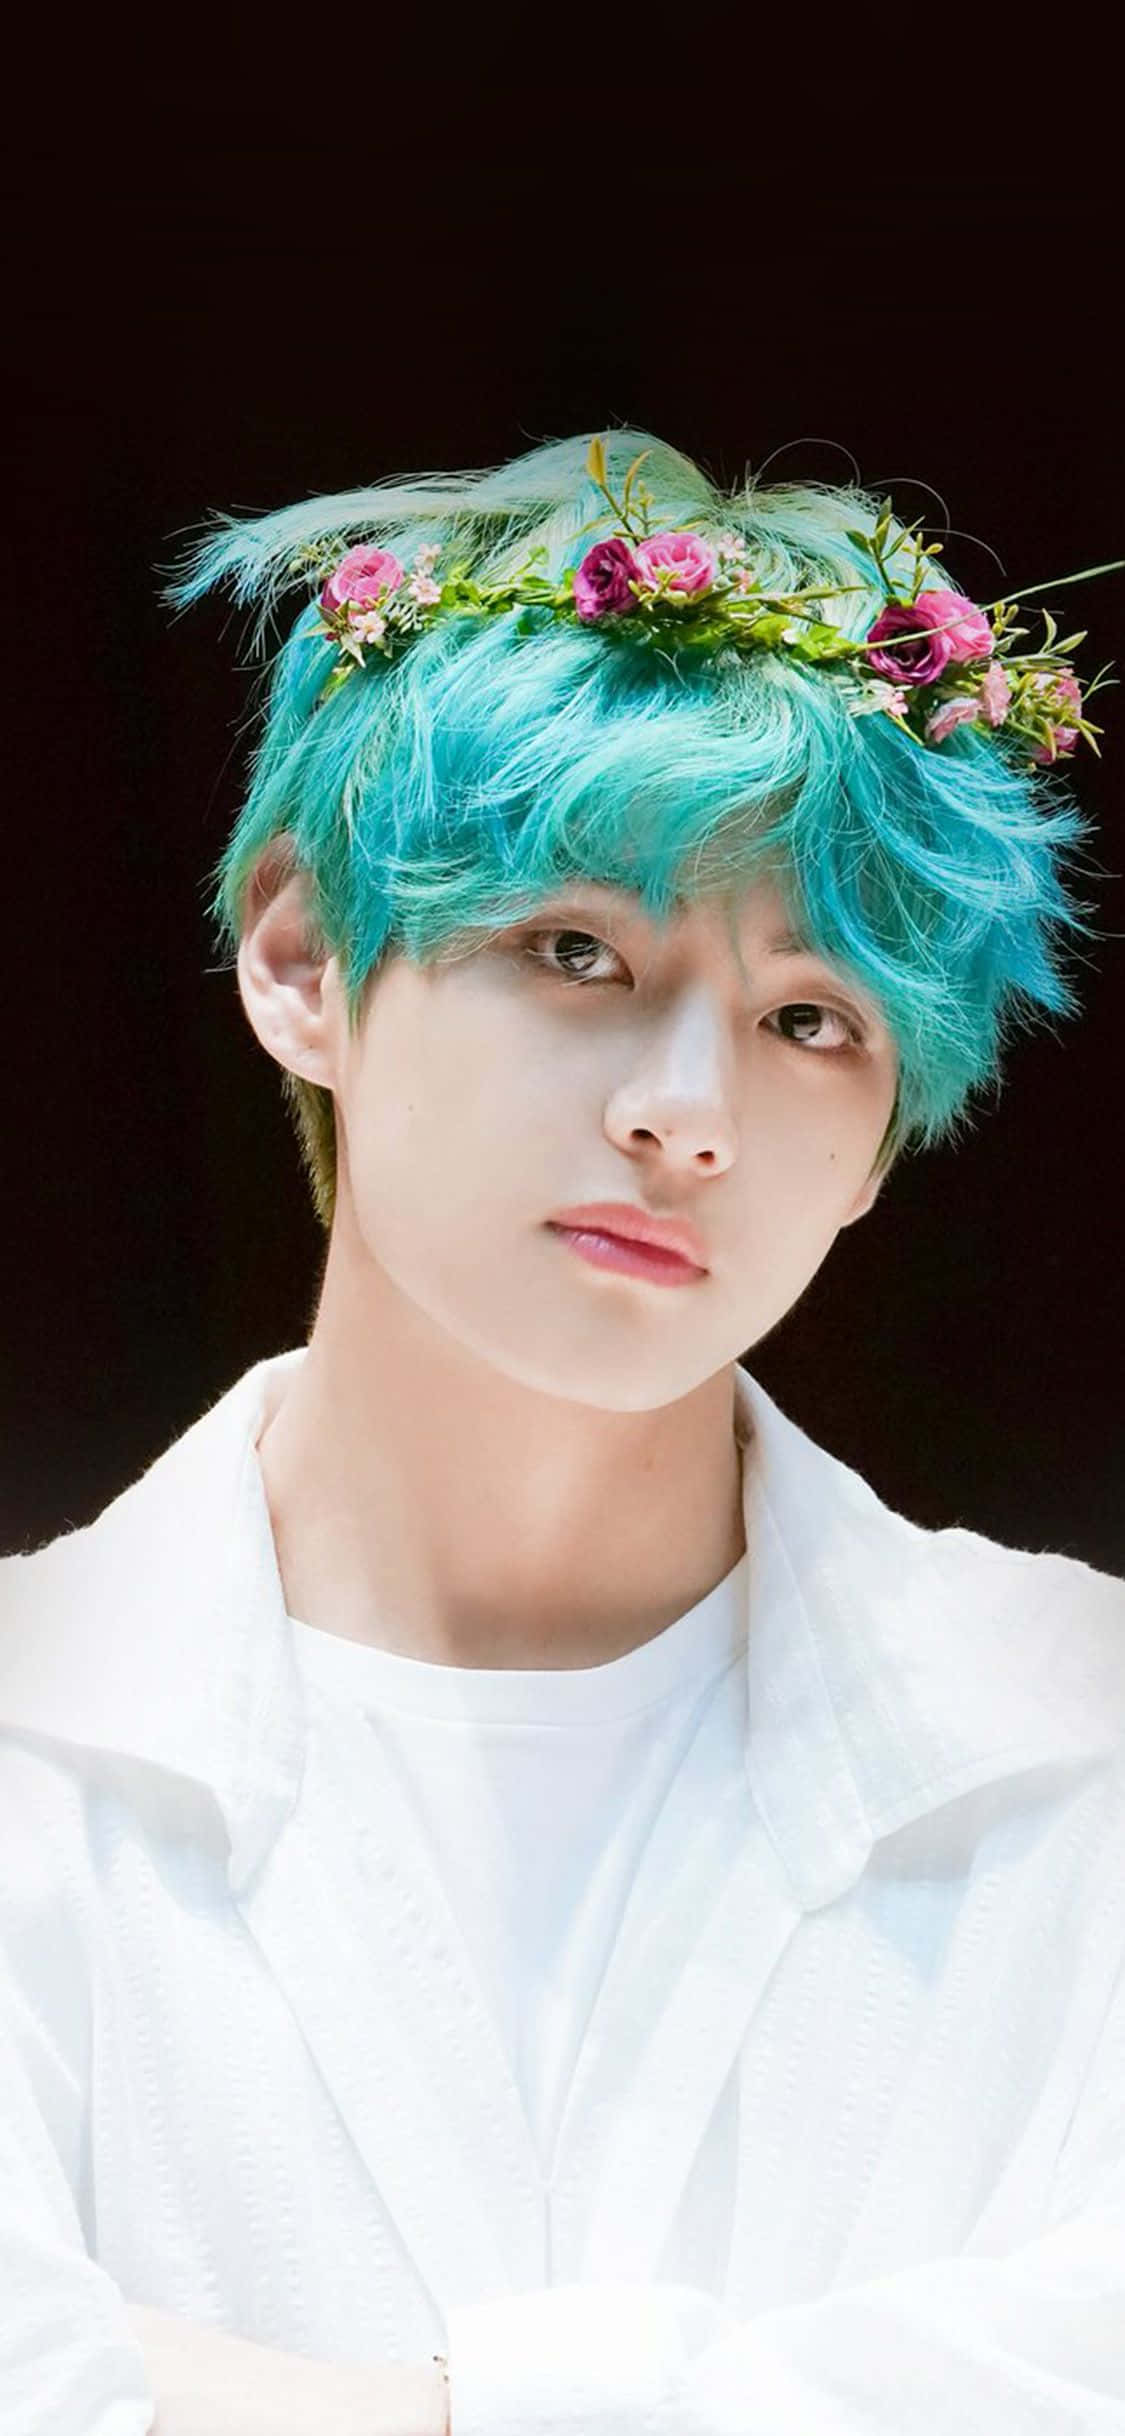 Download BTS V exudes confidence in his striking fashion style.